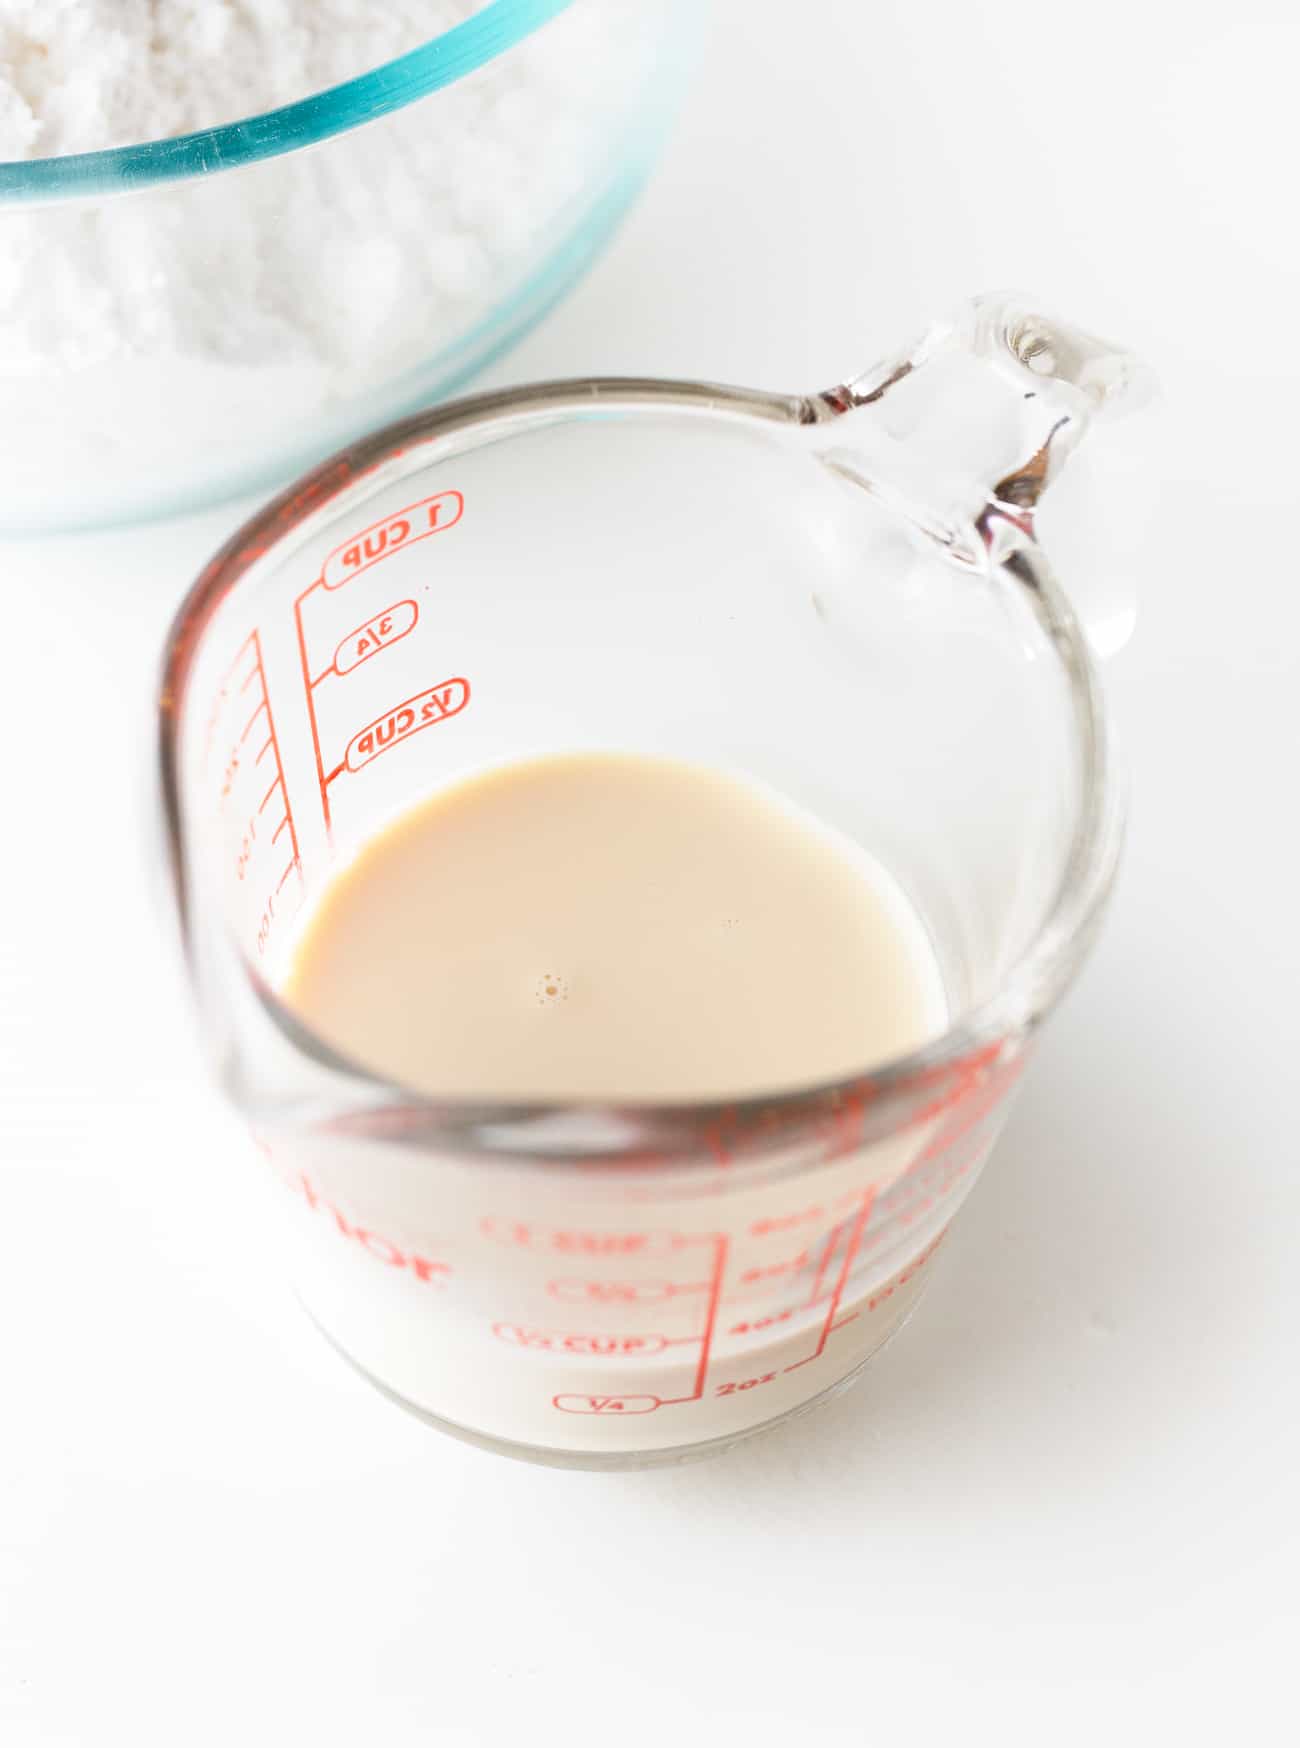 Pyrex glass measuring cup with evaporated milk to make fudgy, easy chocolate frosting.